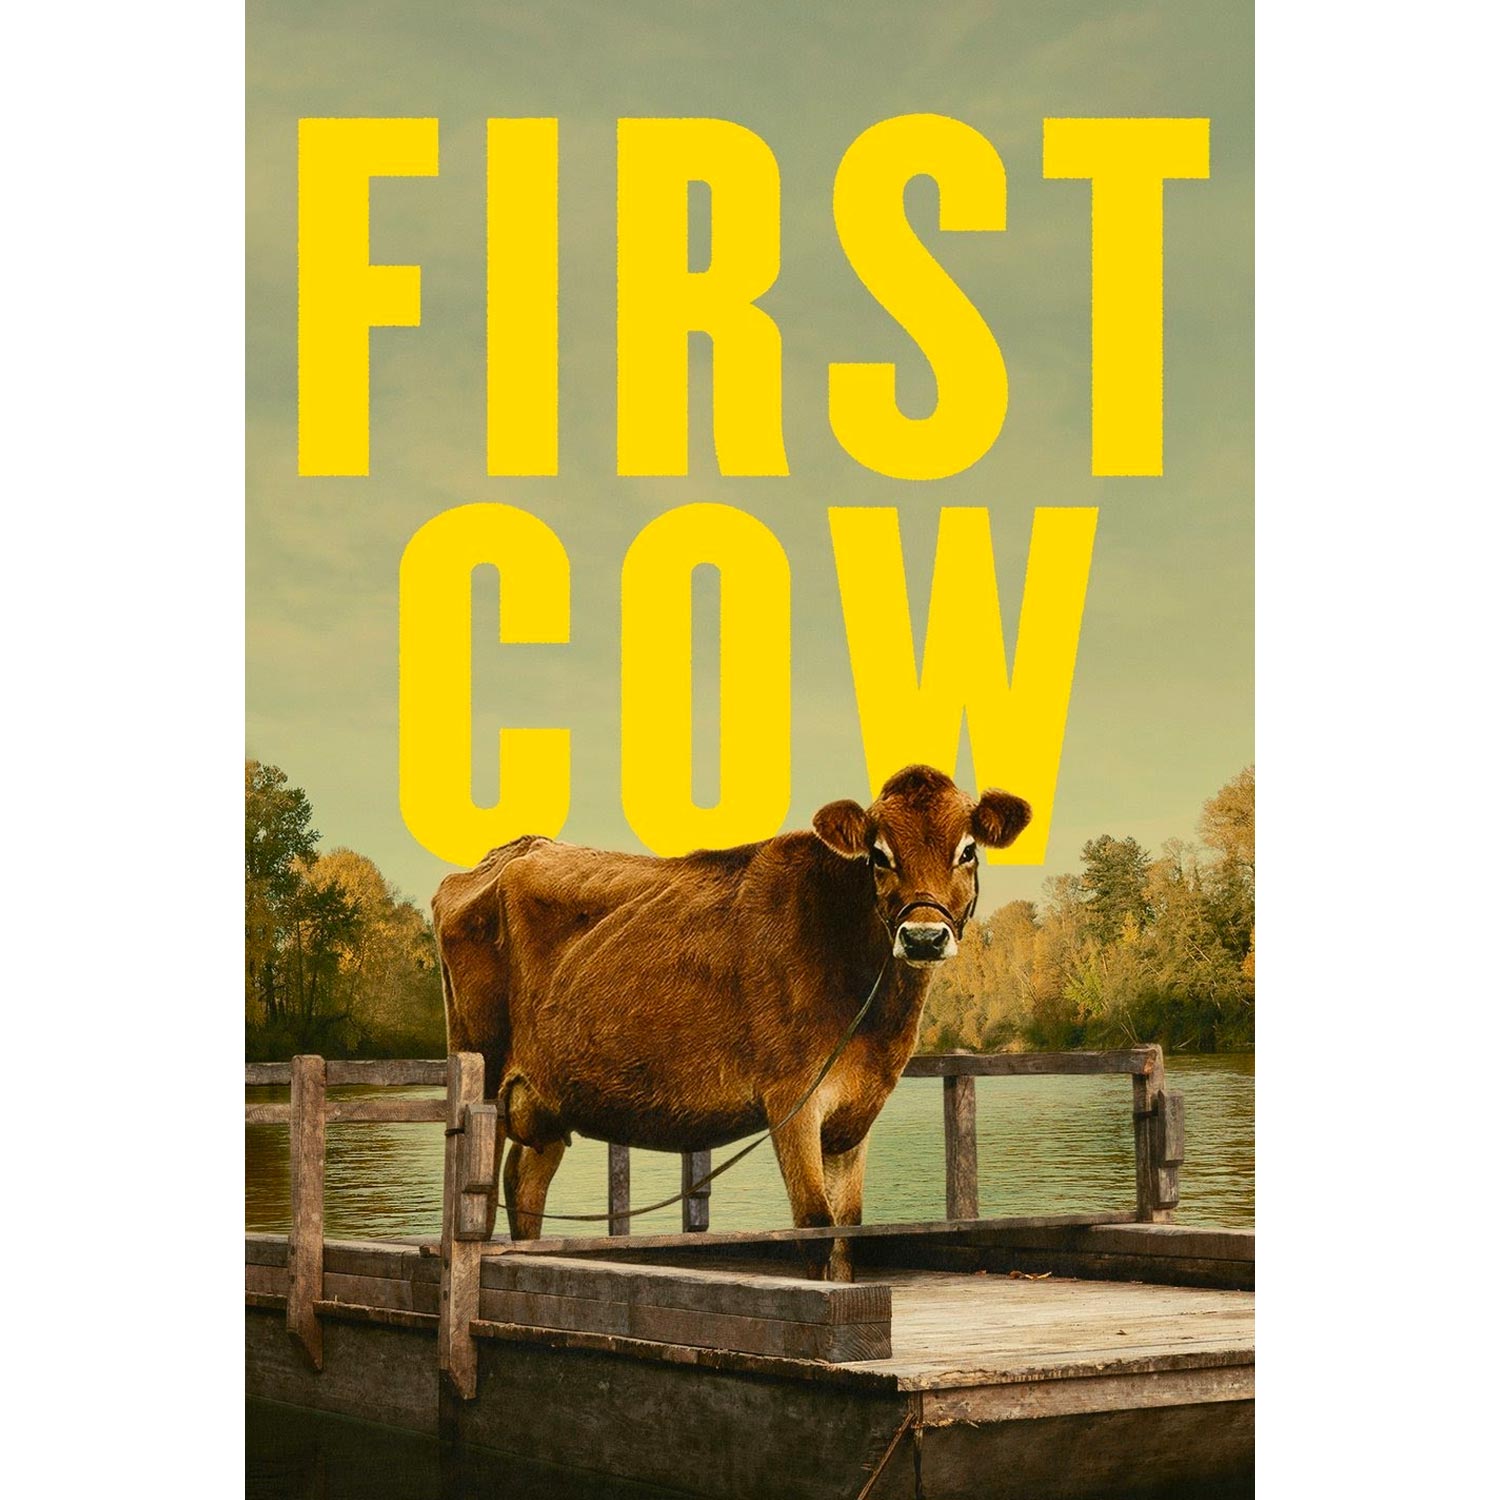 The poster for First Cow.